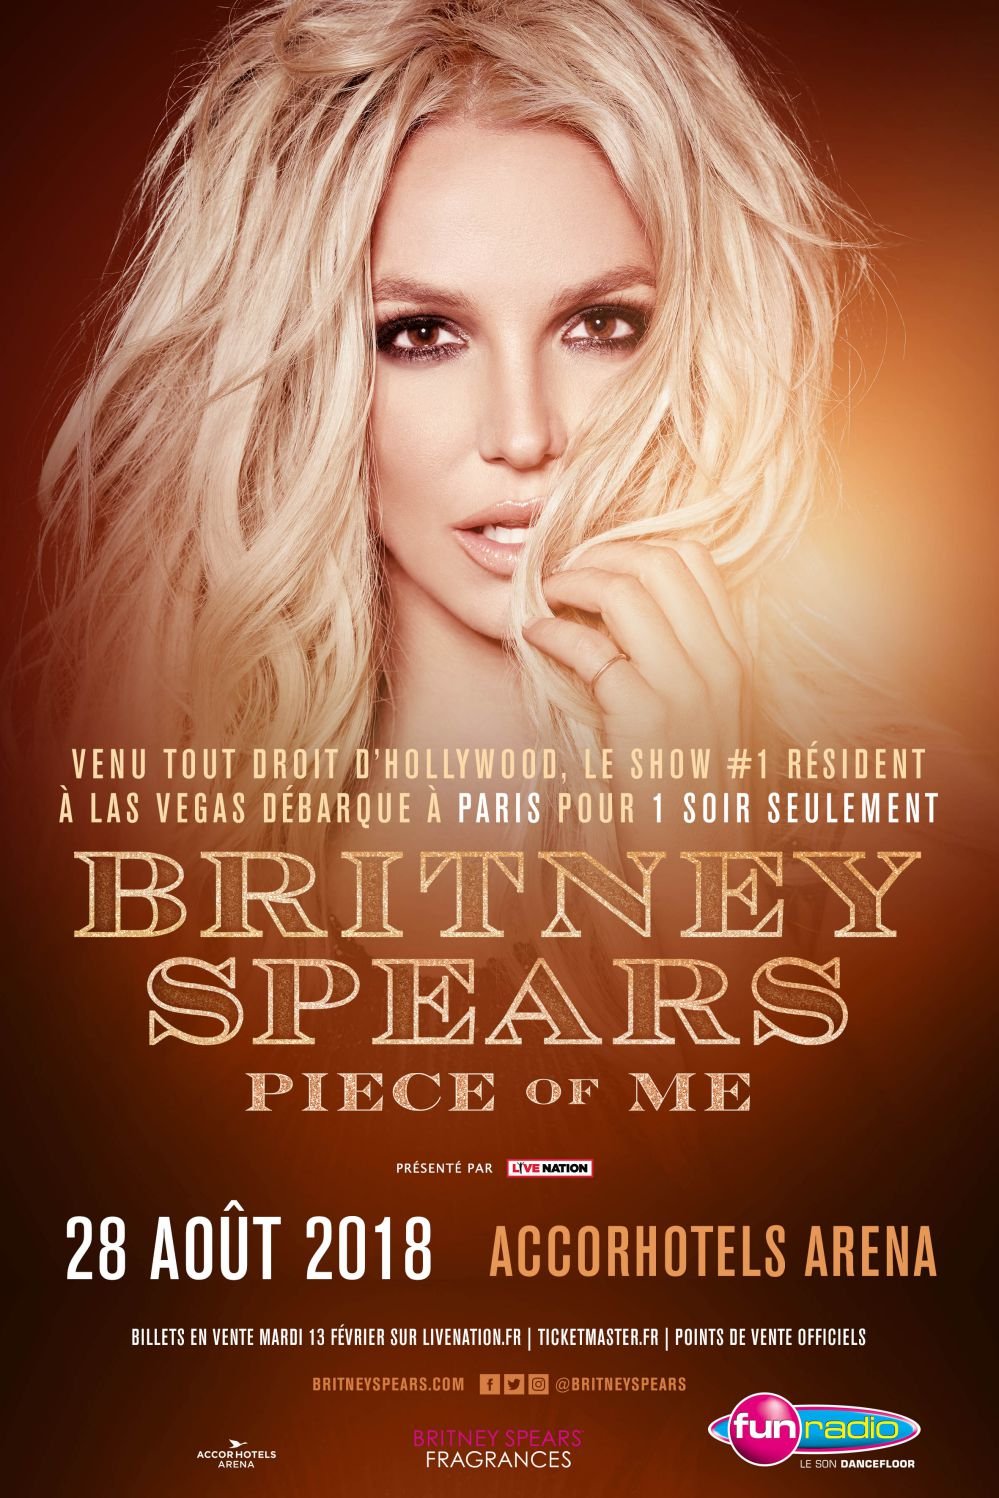 Britney Spears: Piece of Me Tour at AccorHotels Arena (Paris) on 28 Aug  2018 | Last.fm